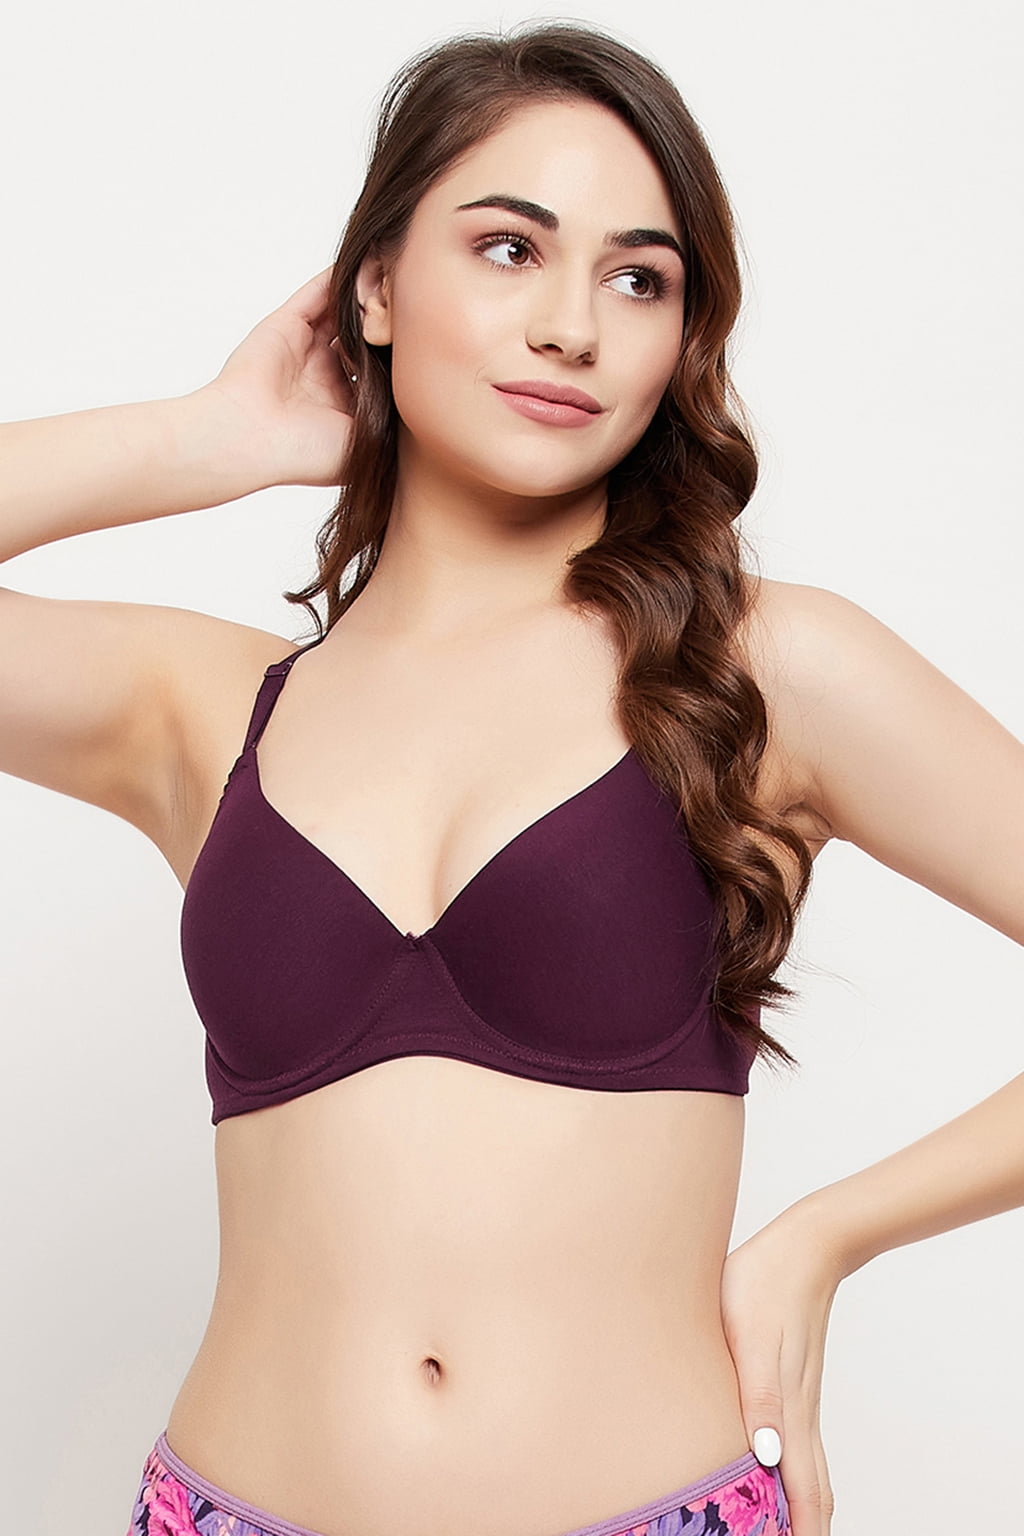 Buy Clovia Level 1 Push-Up Non-Wired Demi Cup Multiway T-shirt Bra